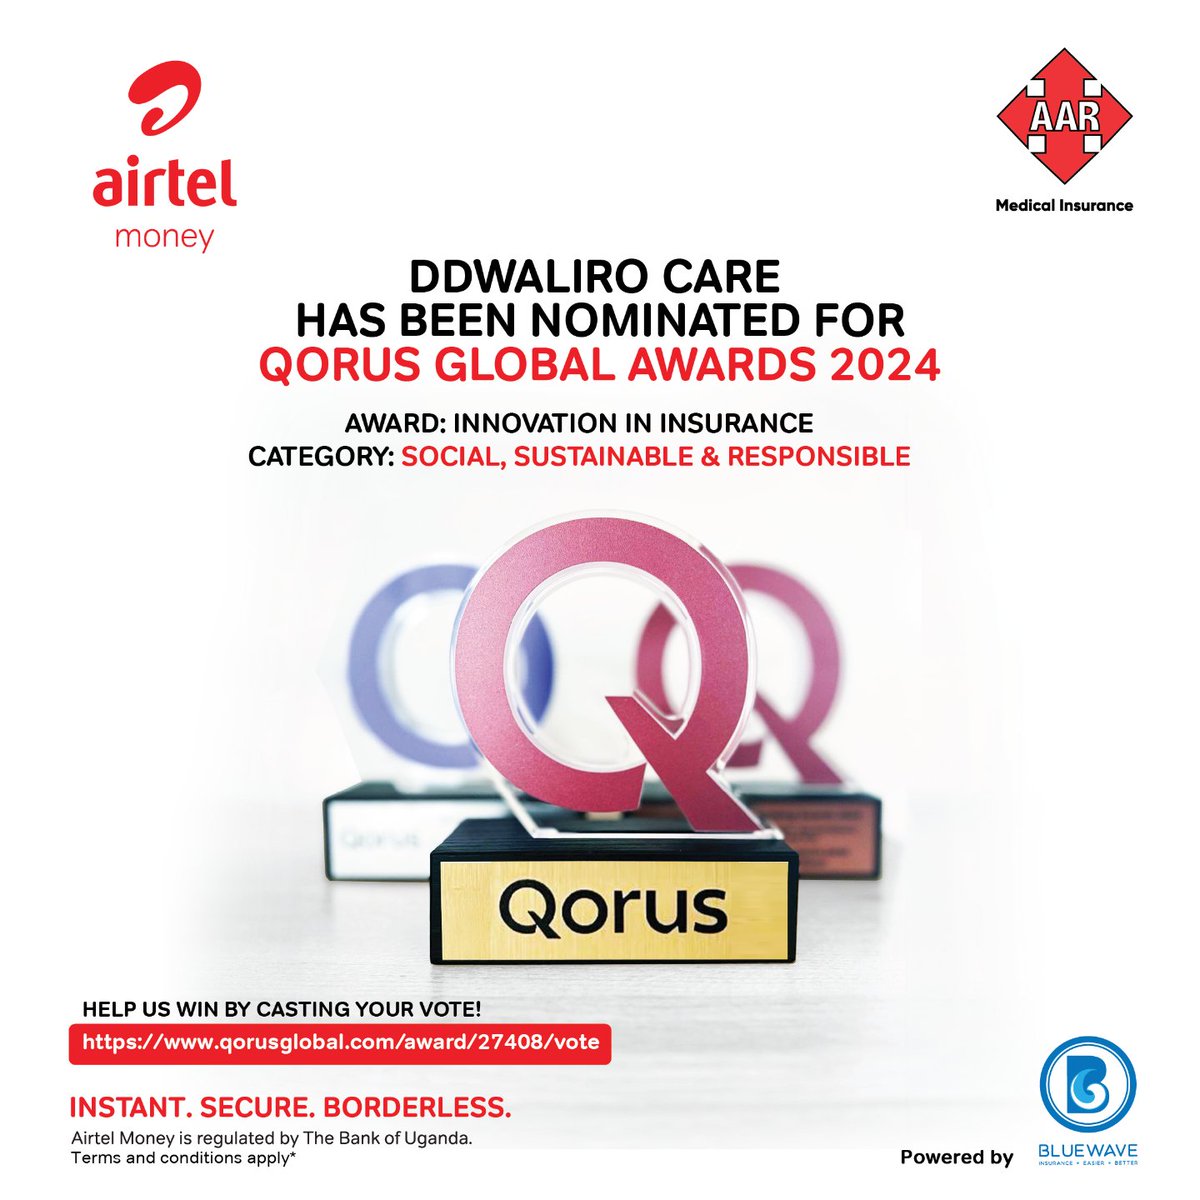 Today is the deadline and final chance to make a difference! Vote for Ddwaliro Care in the Qorus Innovation in Insurance Awards 2024. Your support could help us win in the Social, Sustainable & Responsible category. Vote now: qorusglobal.com/award/27408/vo….